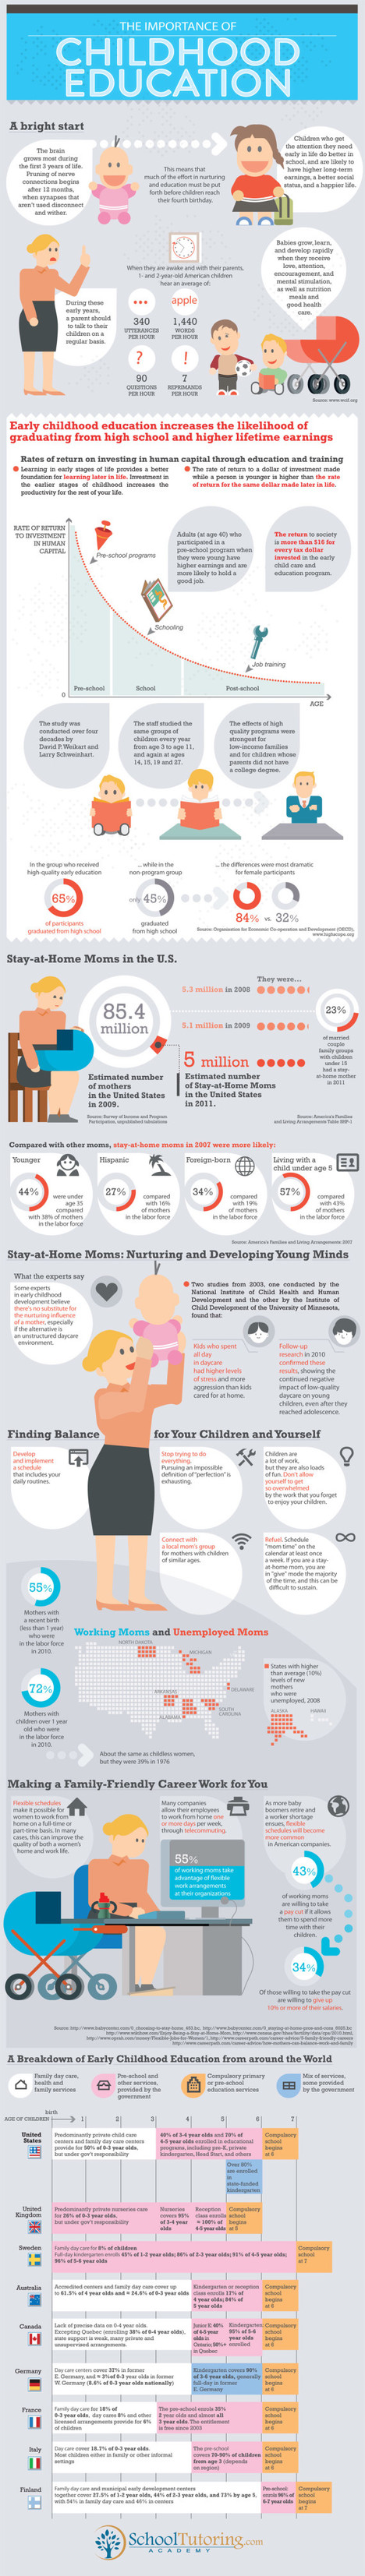 Childhood education infographic